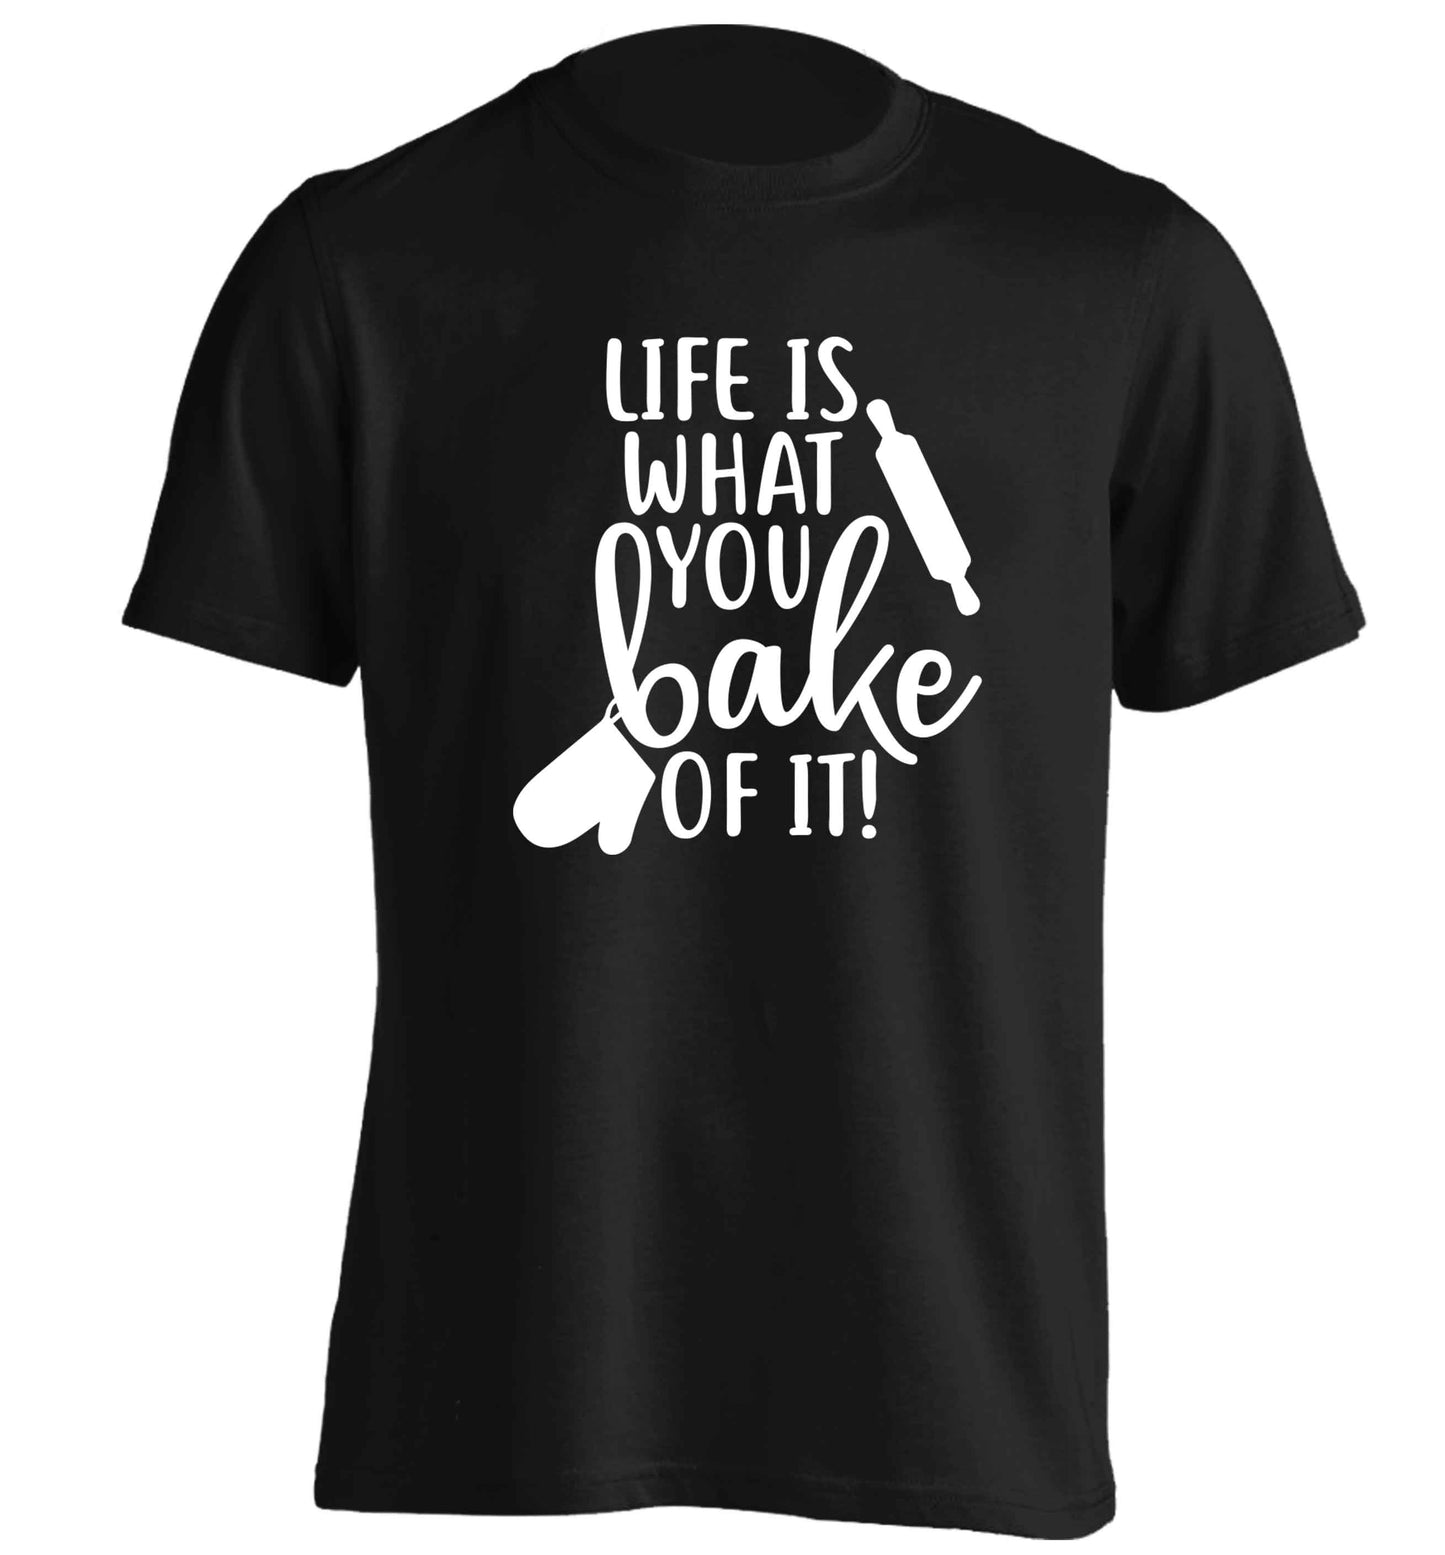 Life is what you bake of it adults unisex black Tshirt 2XL